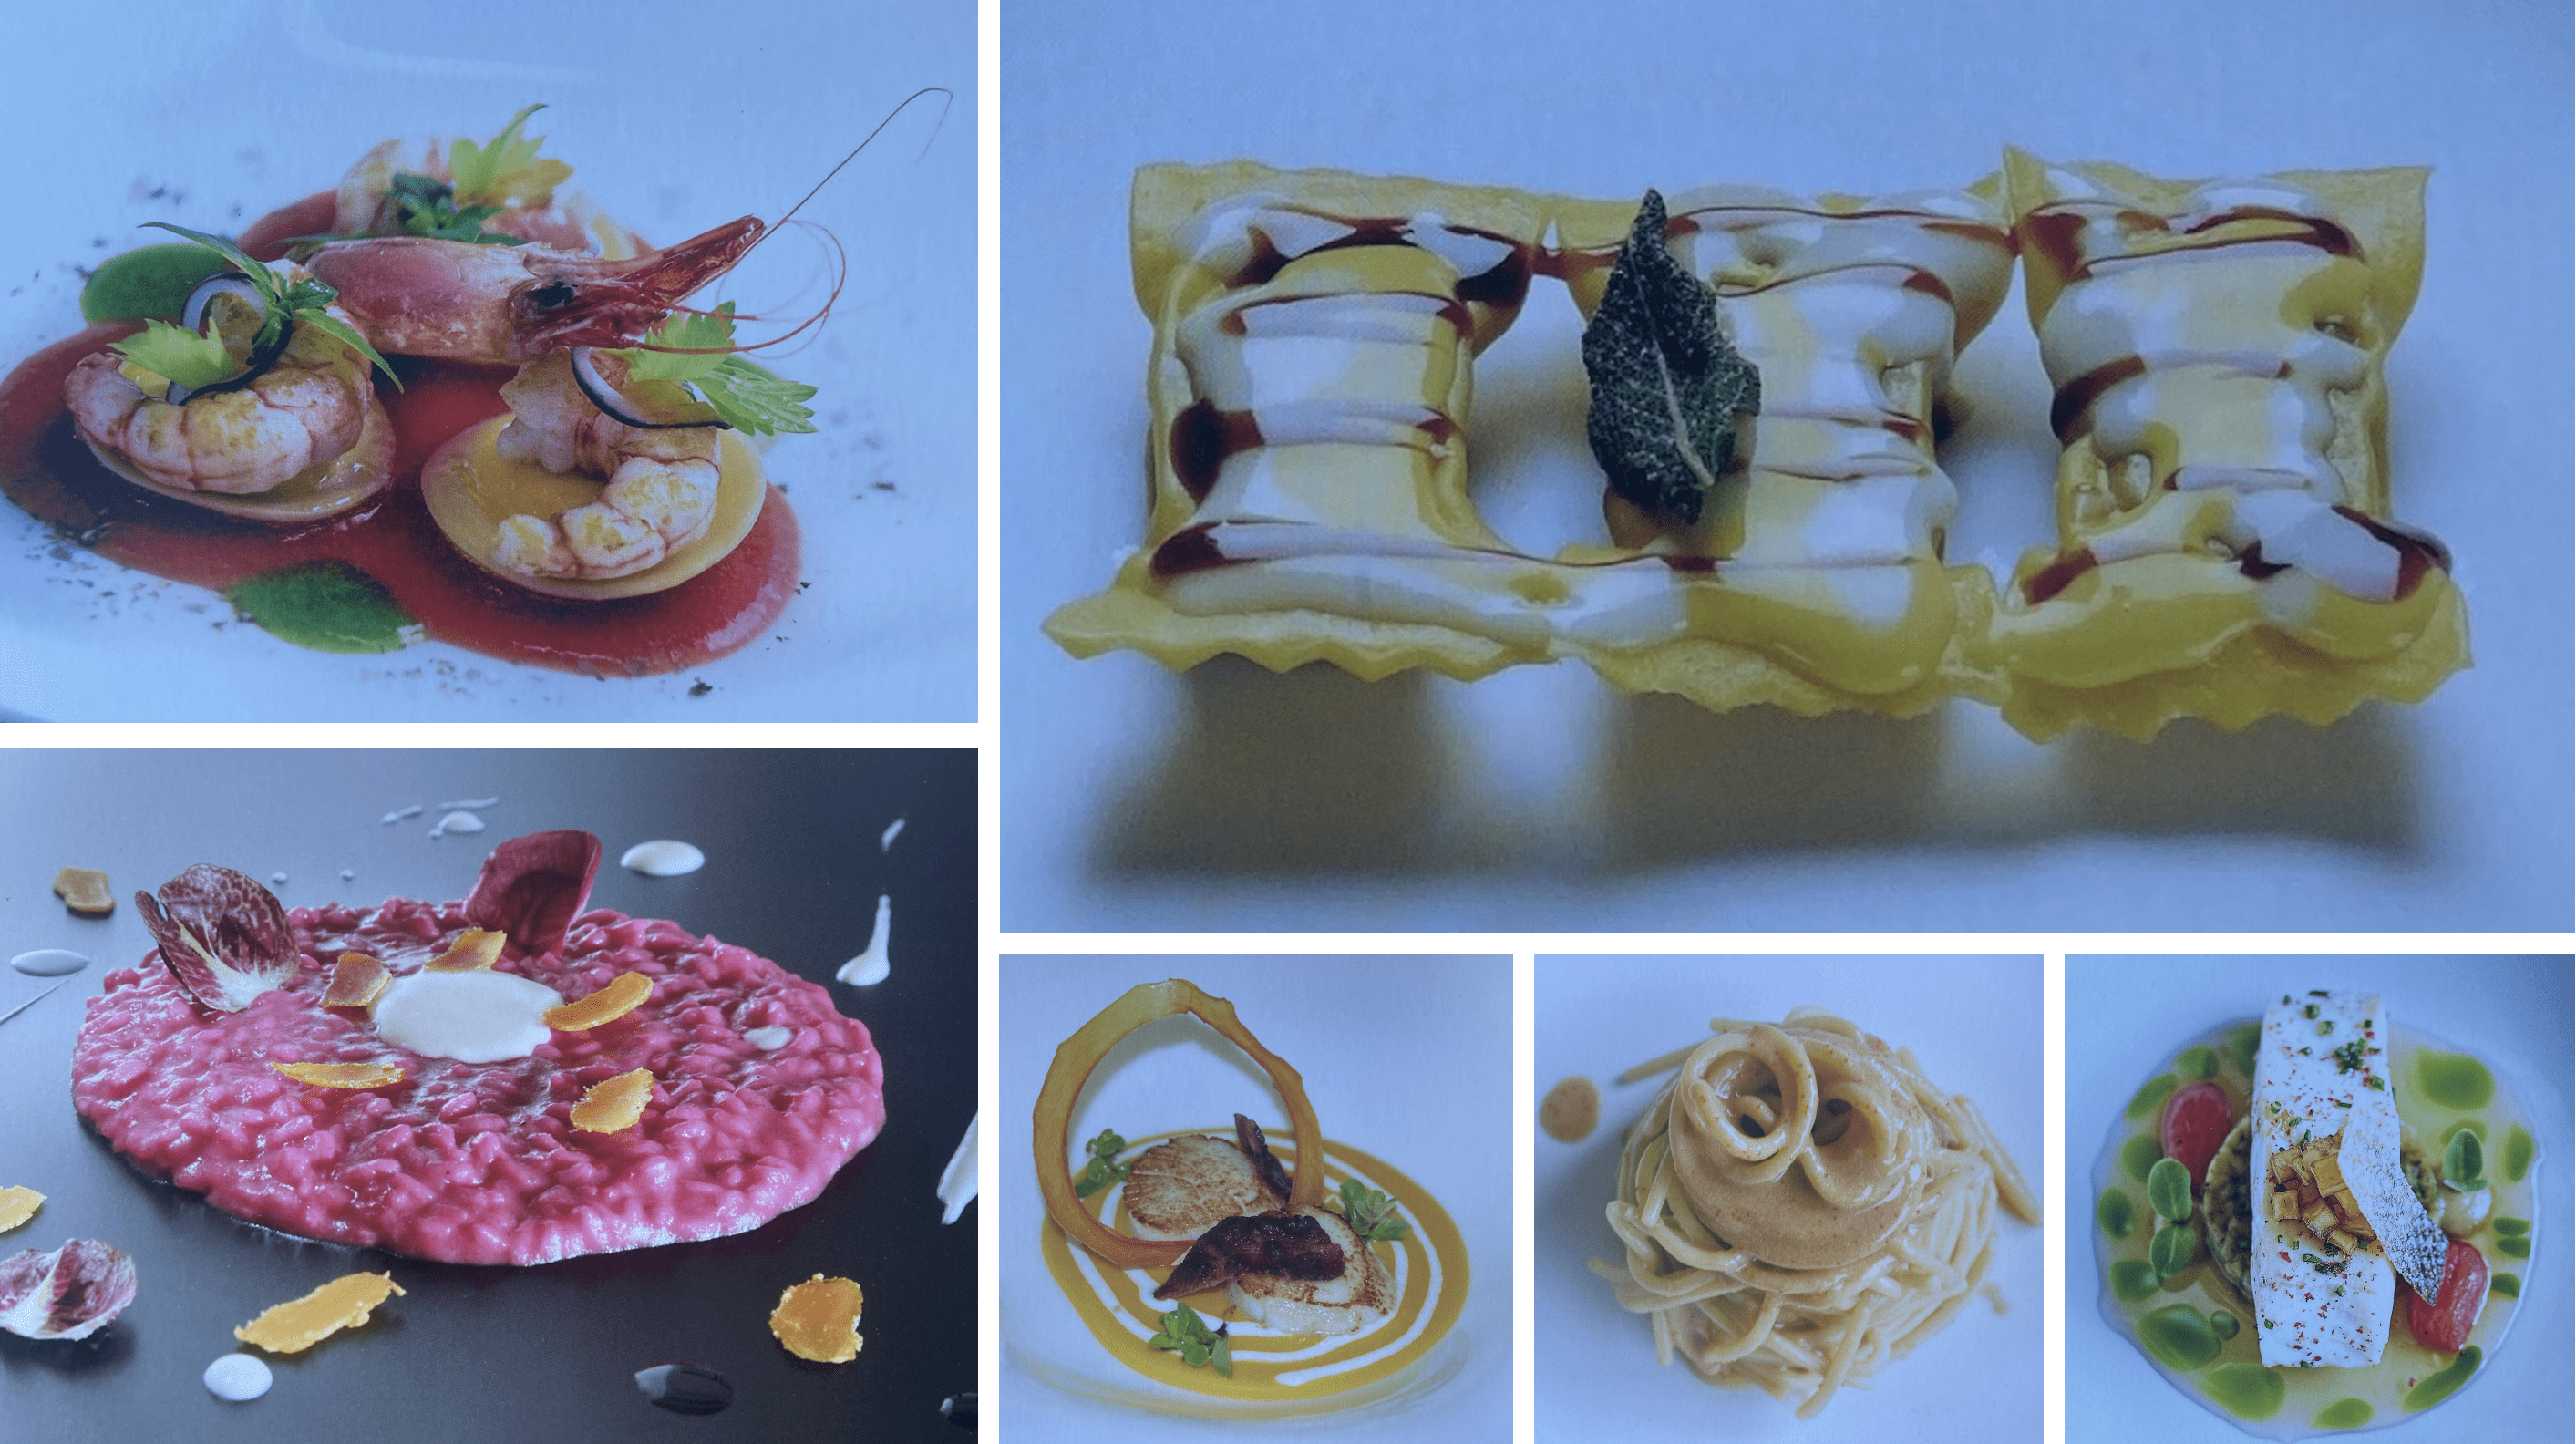 is-this-food-art-or-both